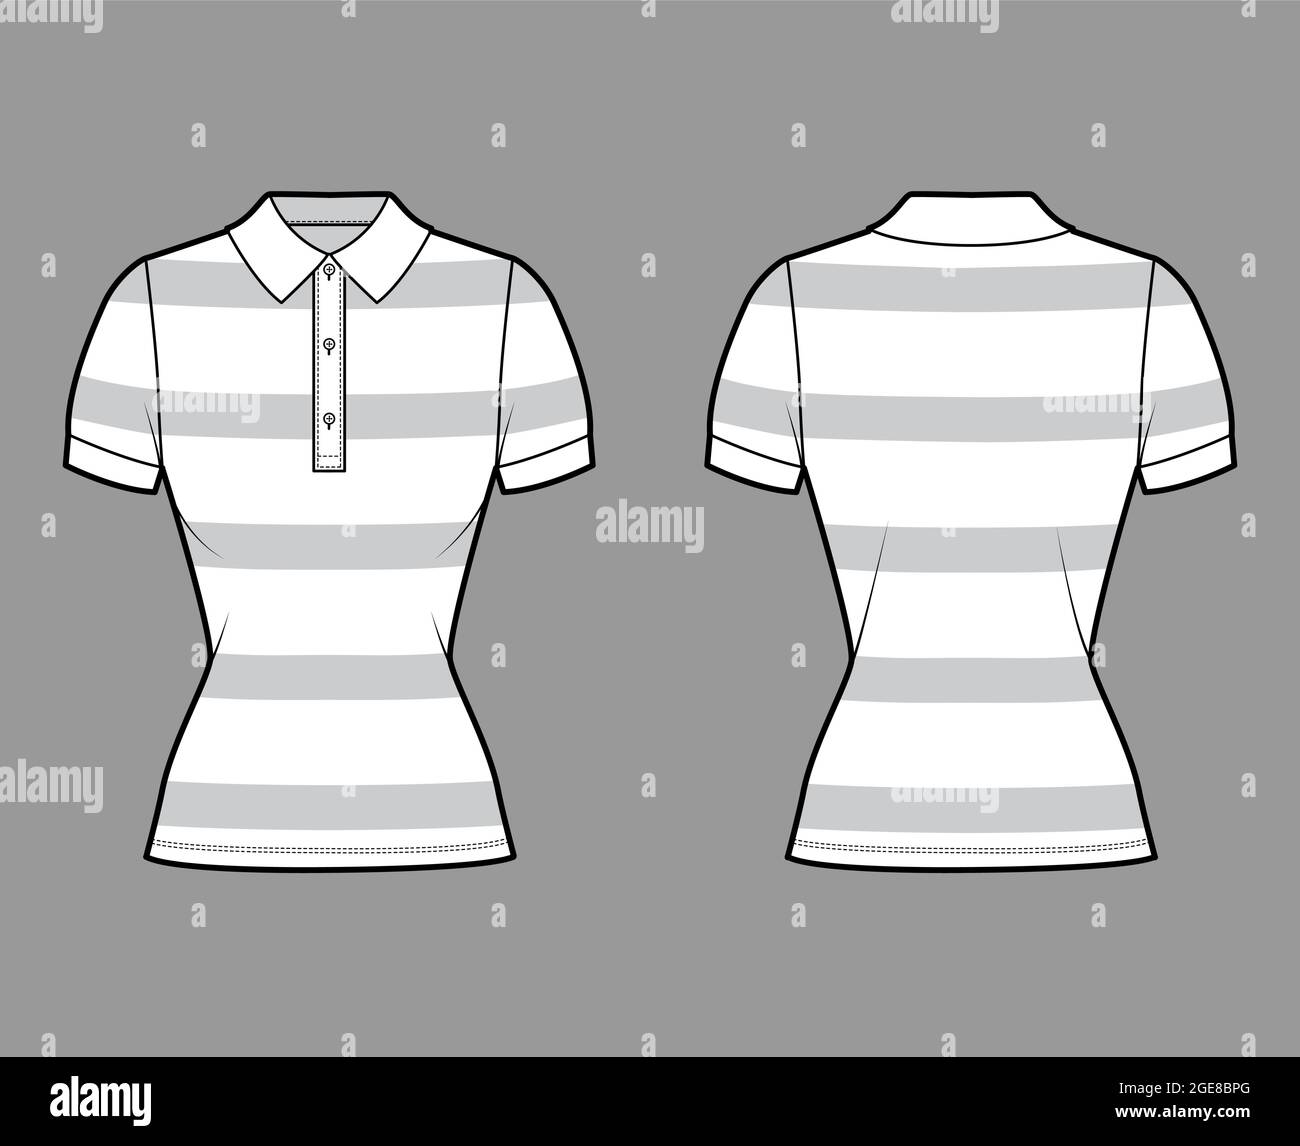 Shirt rugby stripes technical fashion illustration with short sleeves, tunic length,, fitted body, henley polo collar. Apparel top outwear template front, white color style. Women, unisex CAD mockup Stock Vector